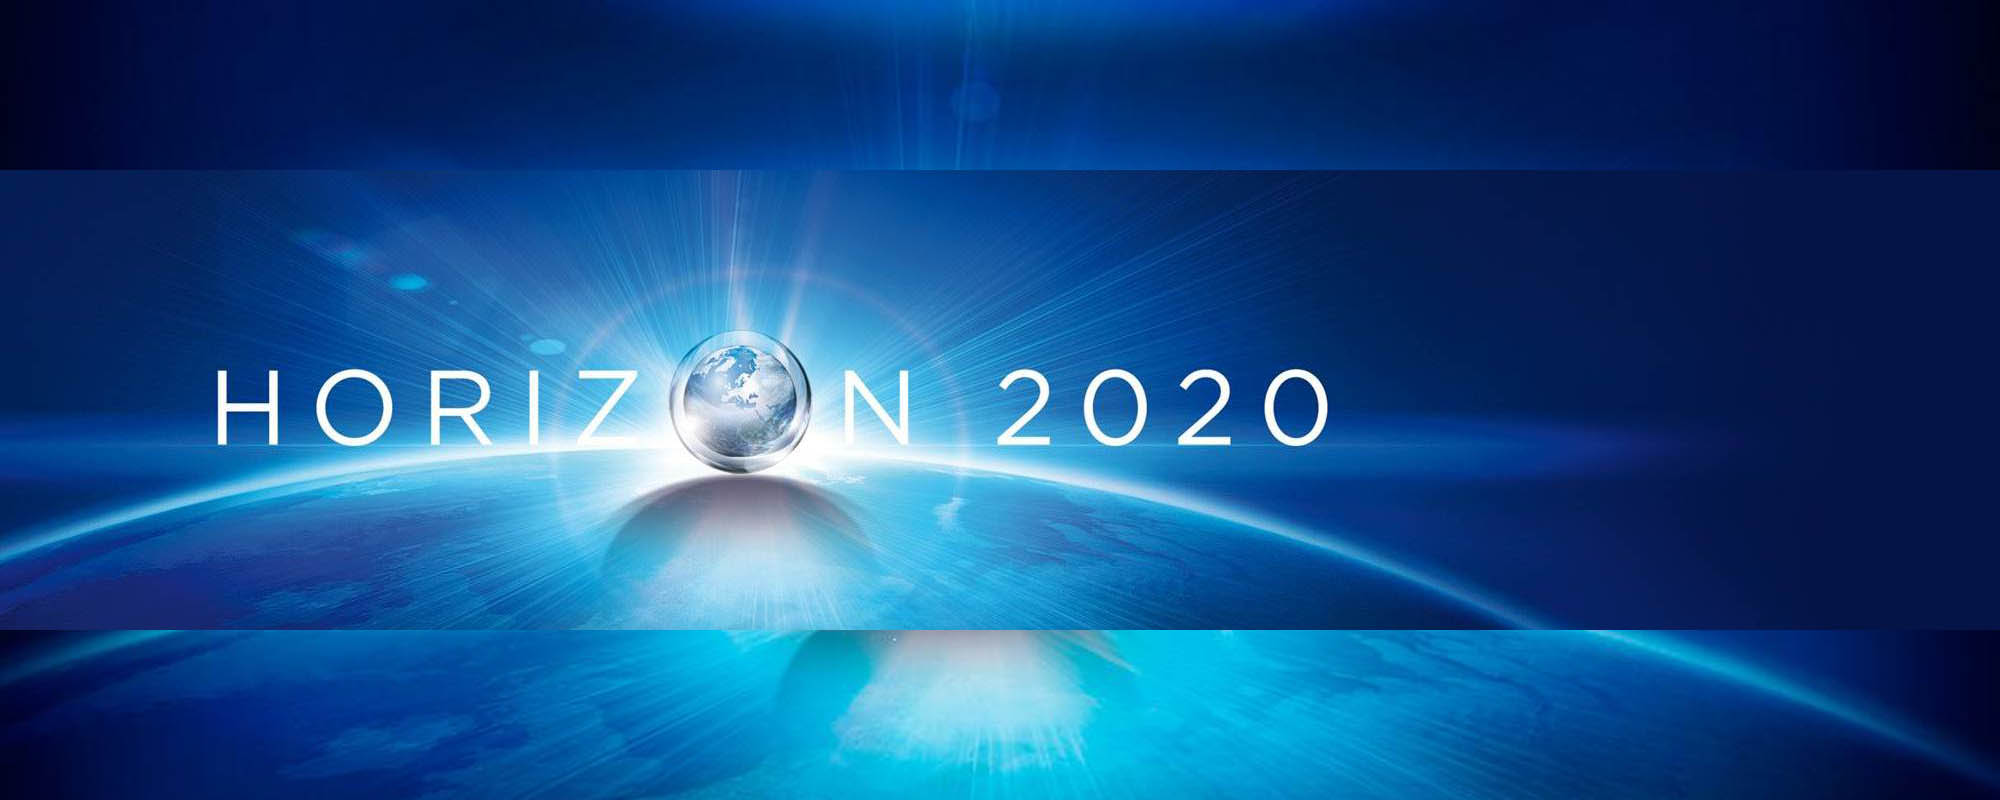 Lutz Peschke Receives Two Horizon 2020 Grants for His Projects